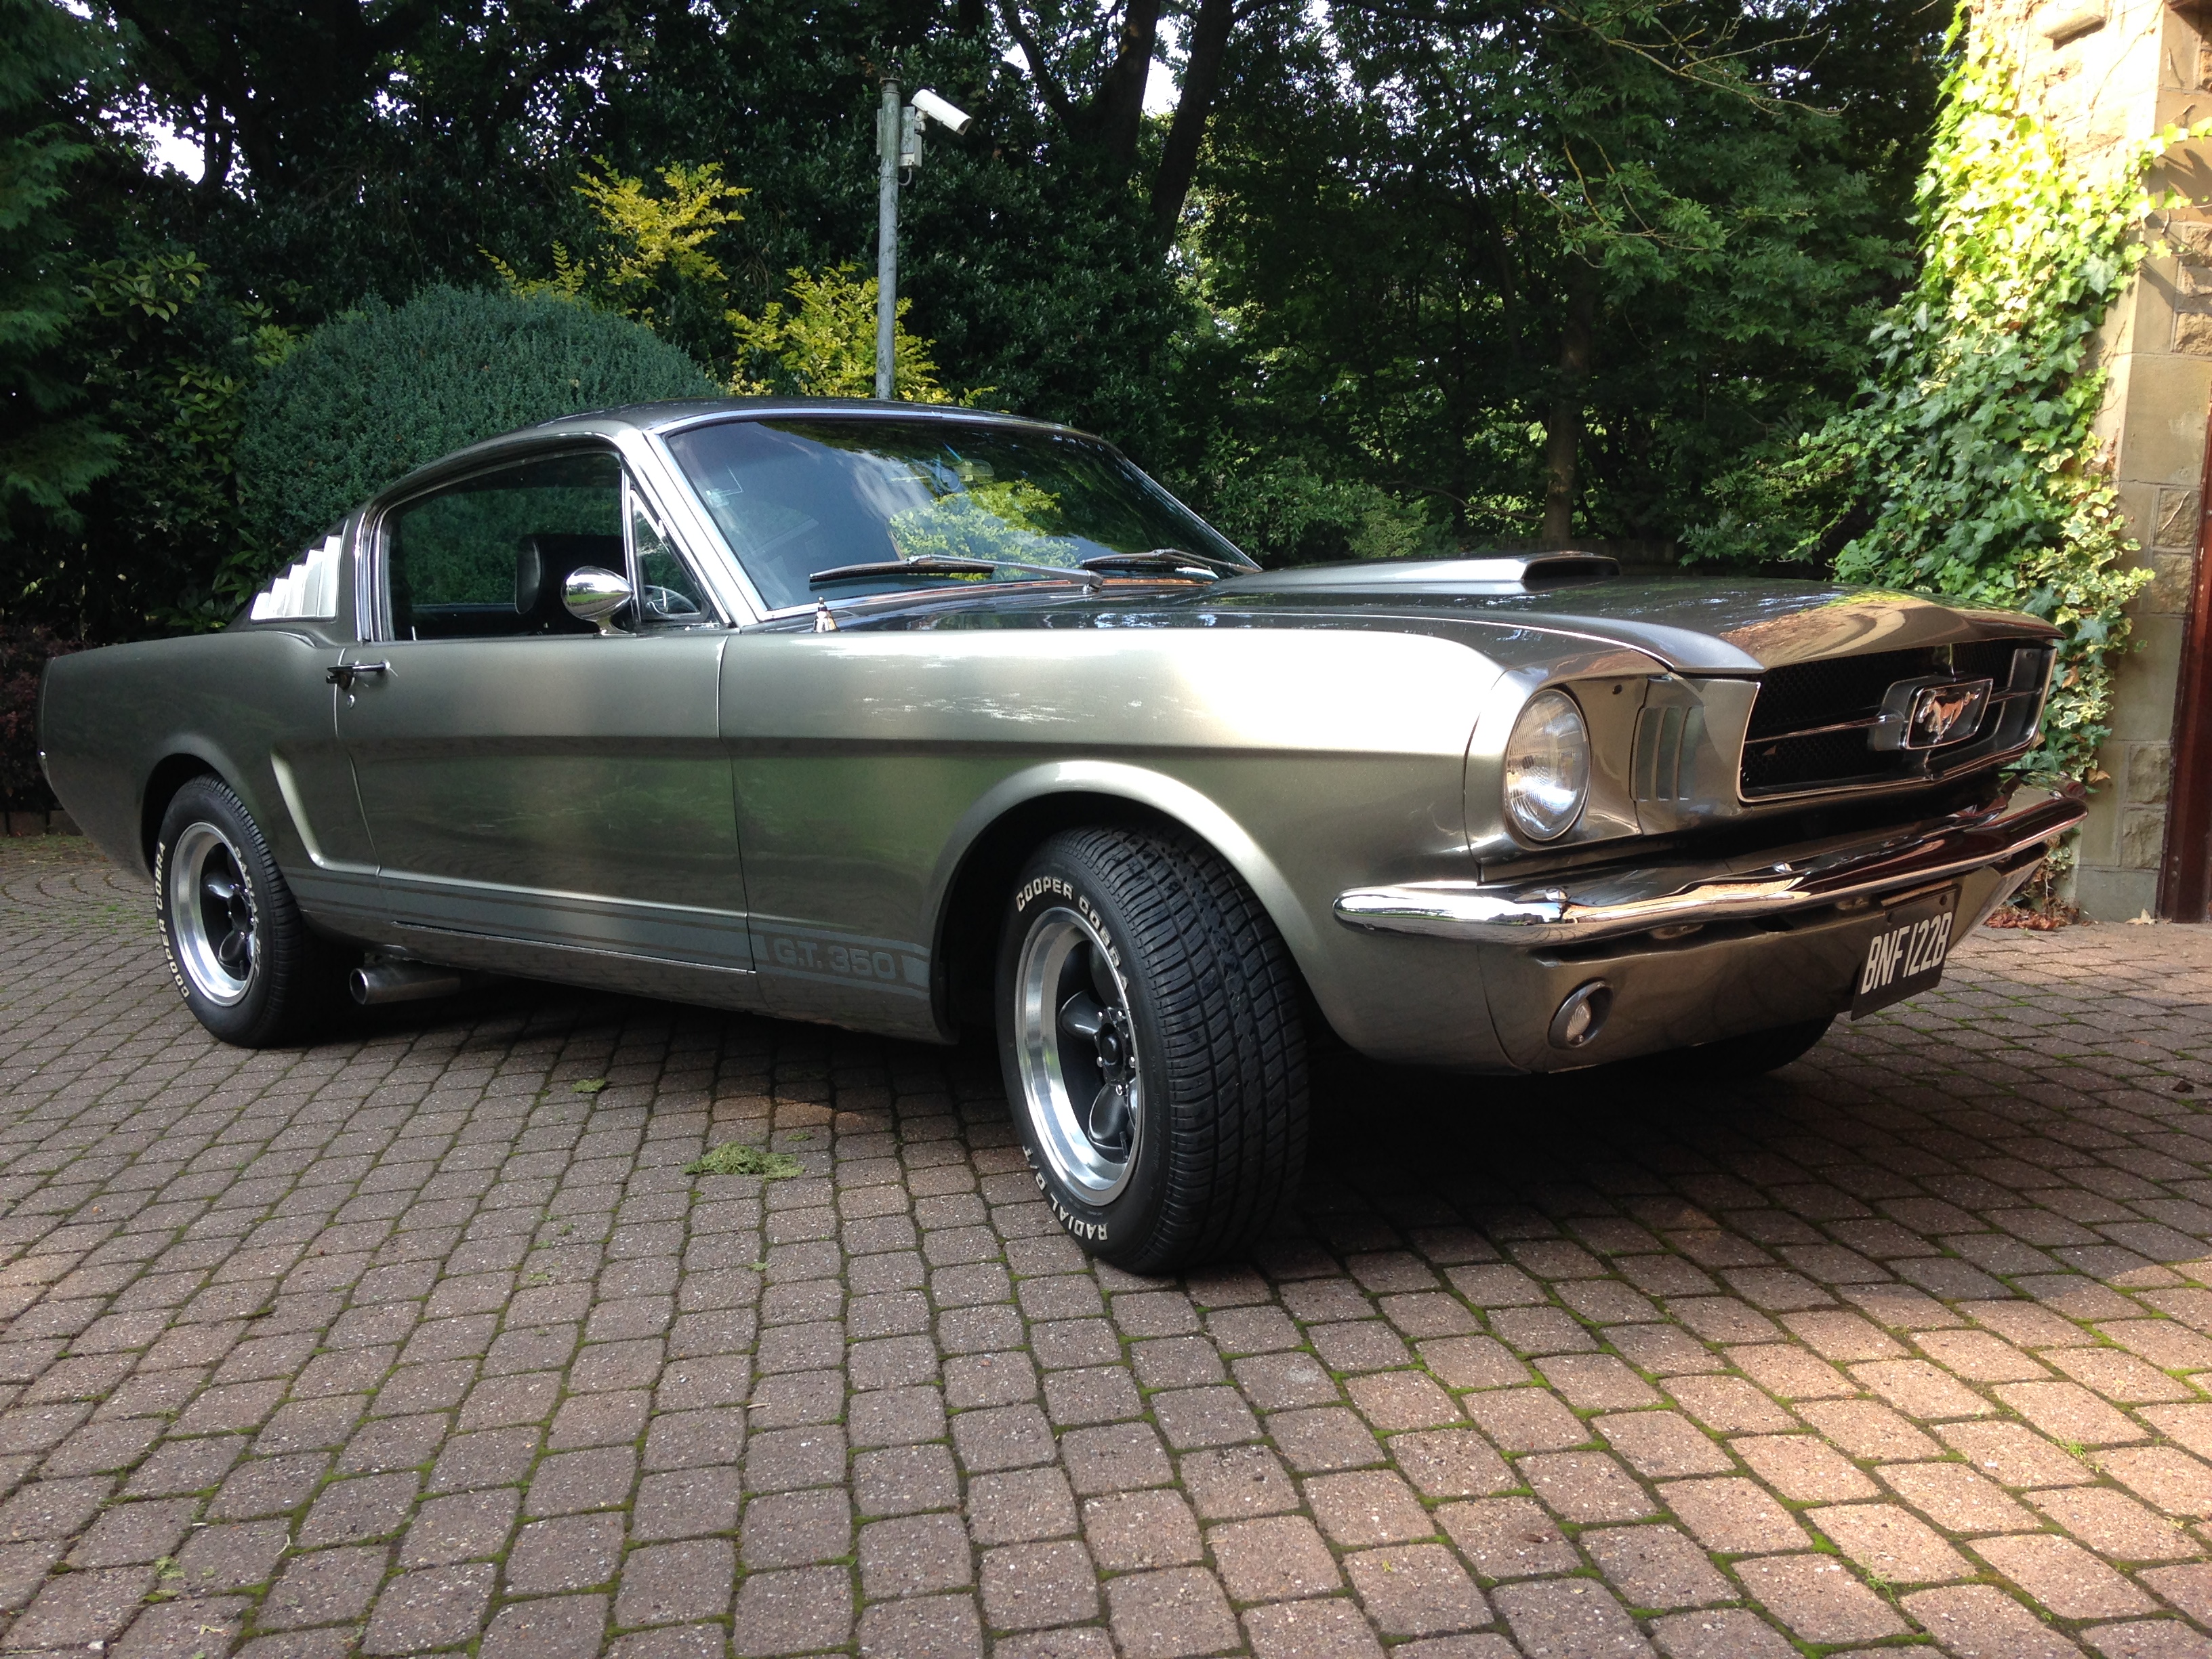 Show us your Mustangs! - Page 3 - Mustangs - PistonHeads